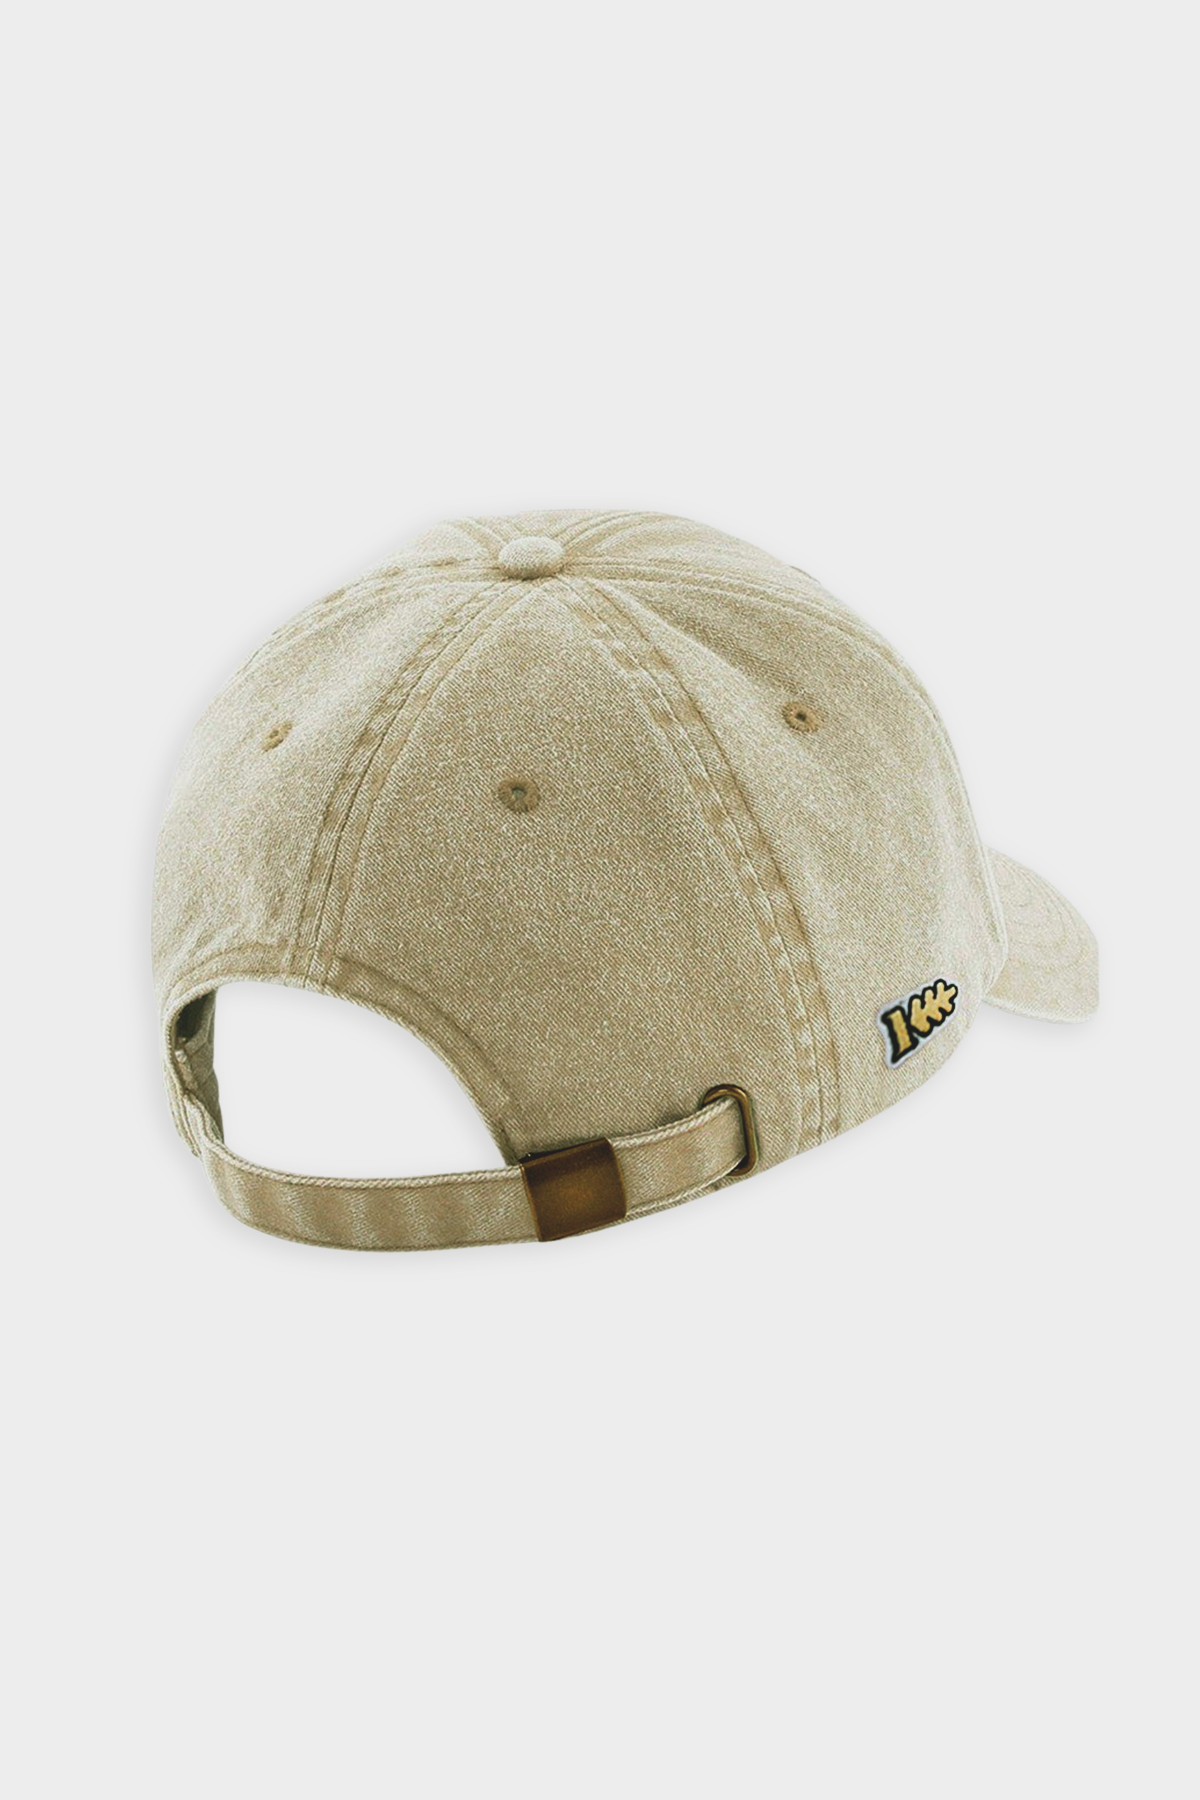 Gorra Klout Dyed Beige para Hombre y Mujer